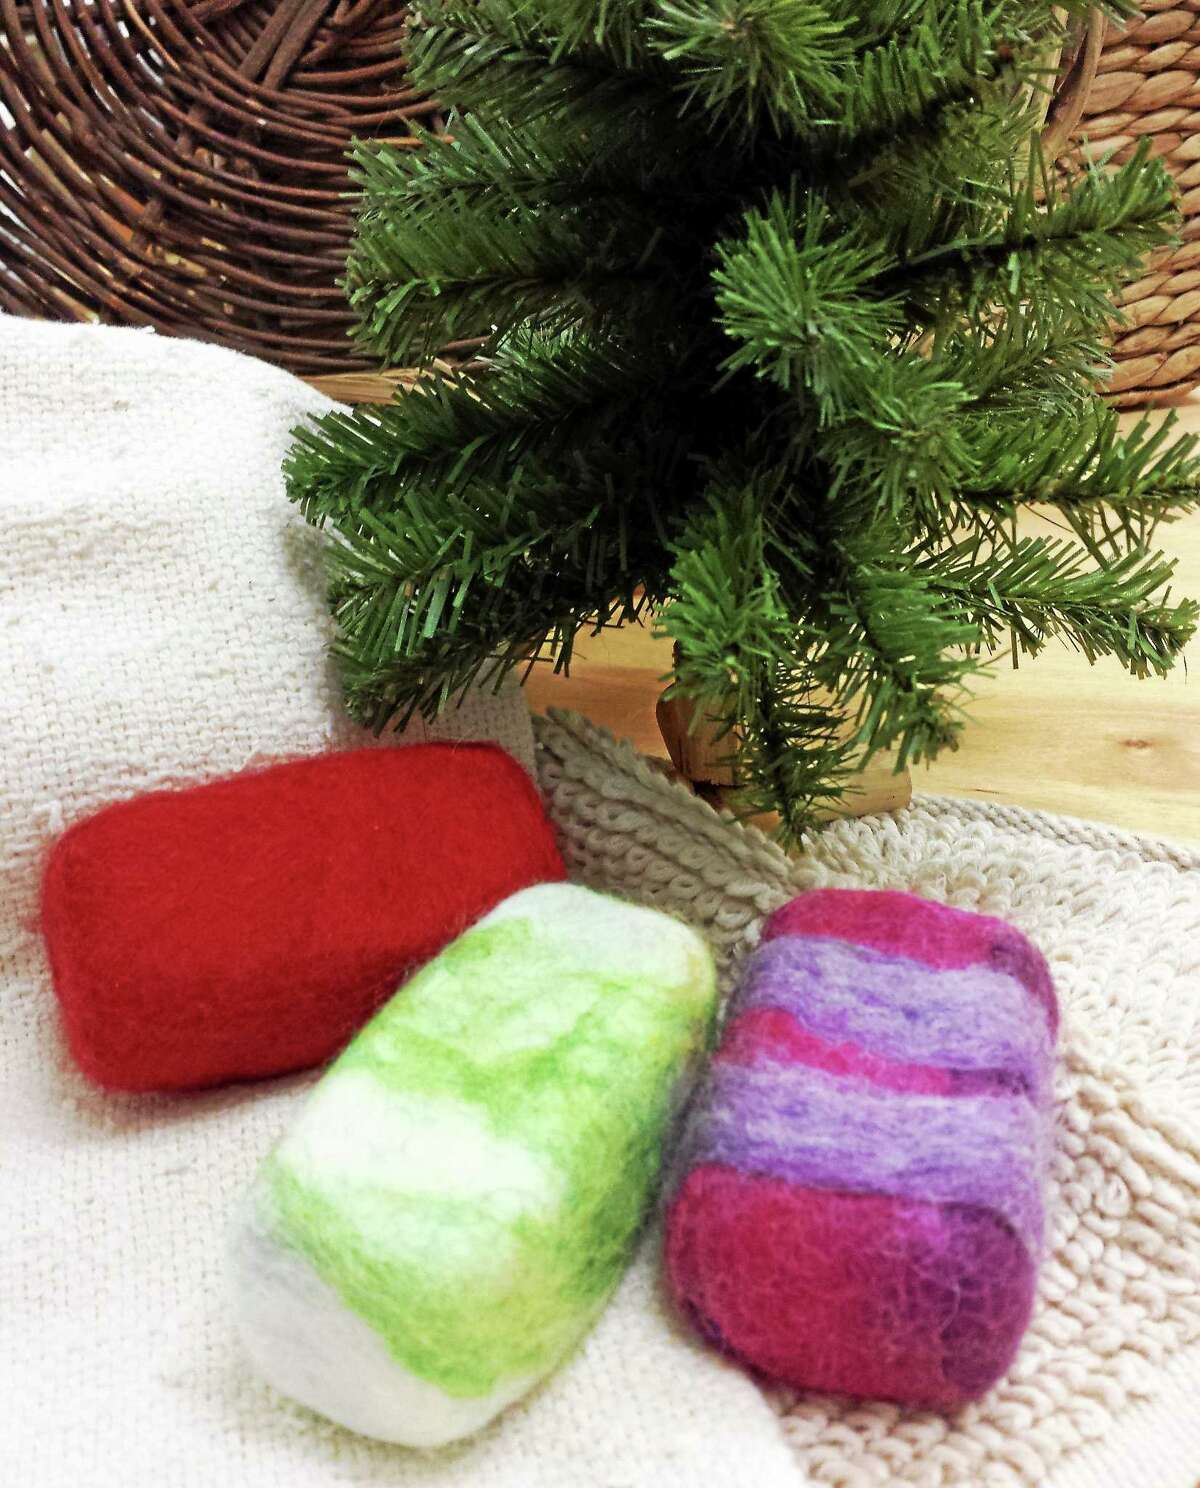 Submitted photo - Ginger Balch Soaps covered with jackets of soft wool make an enticing and easy gift for Christmas.